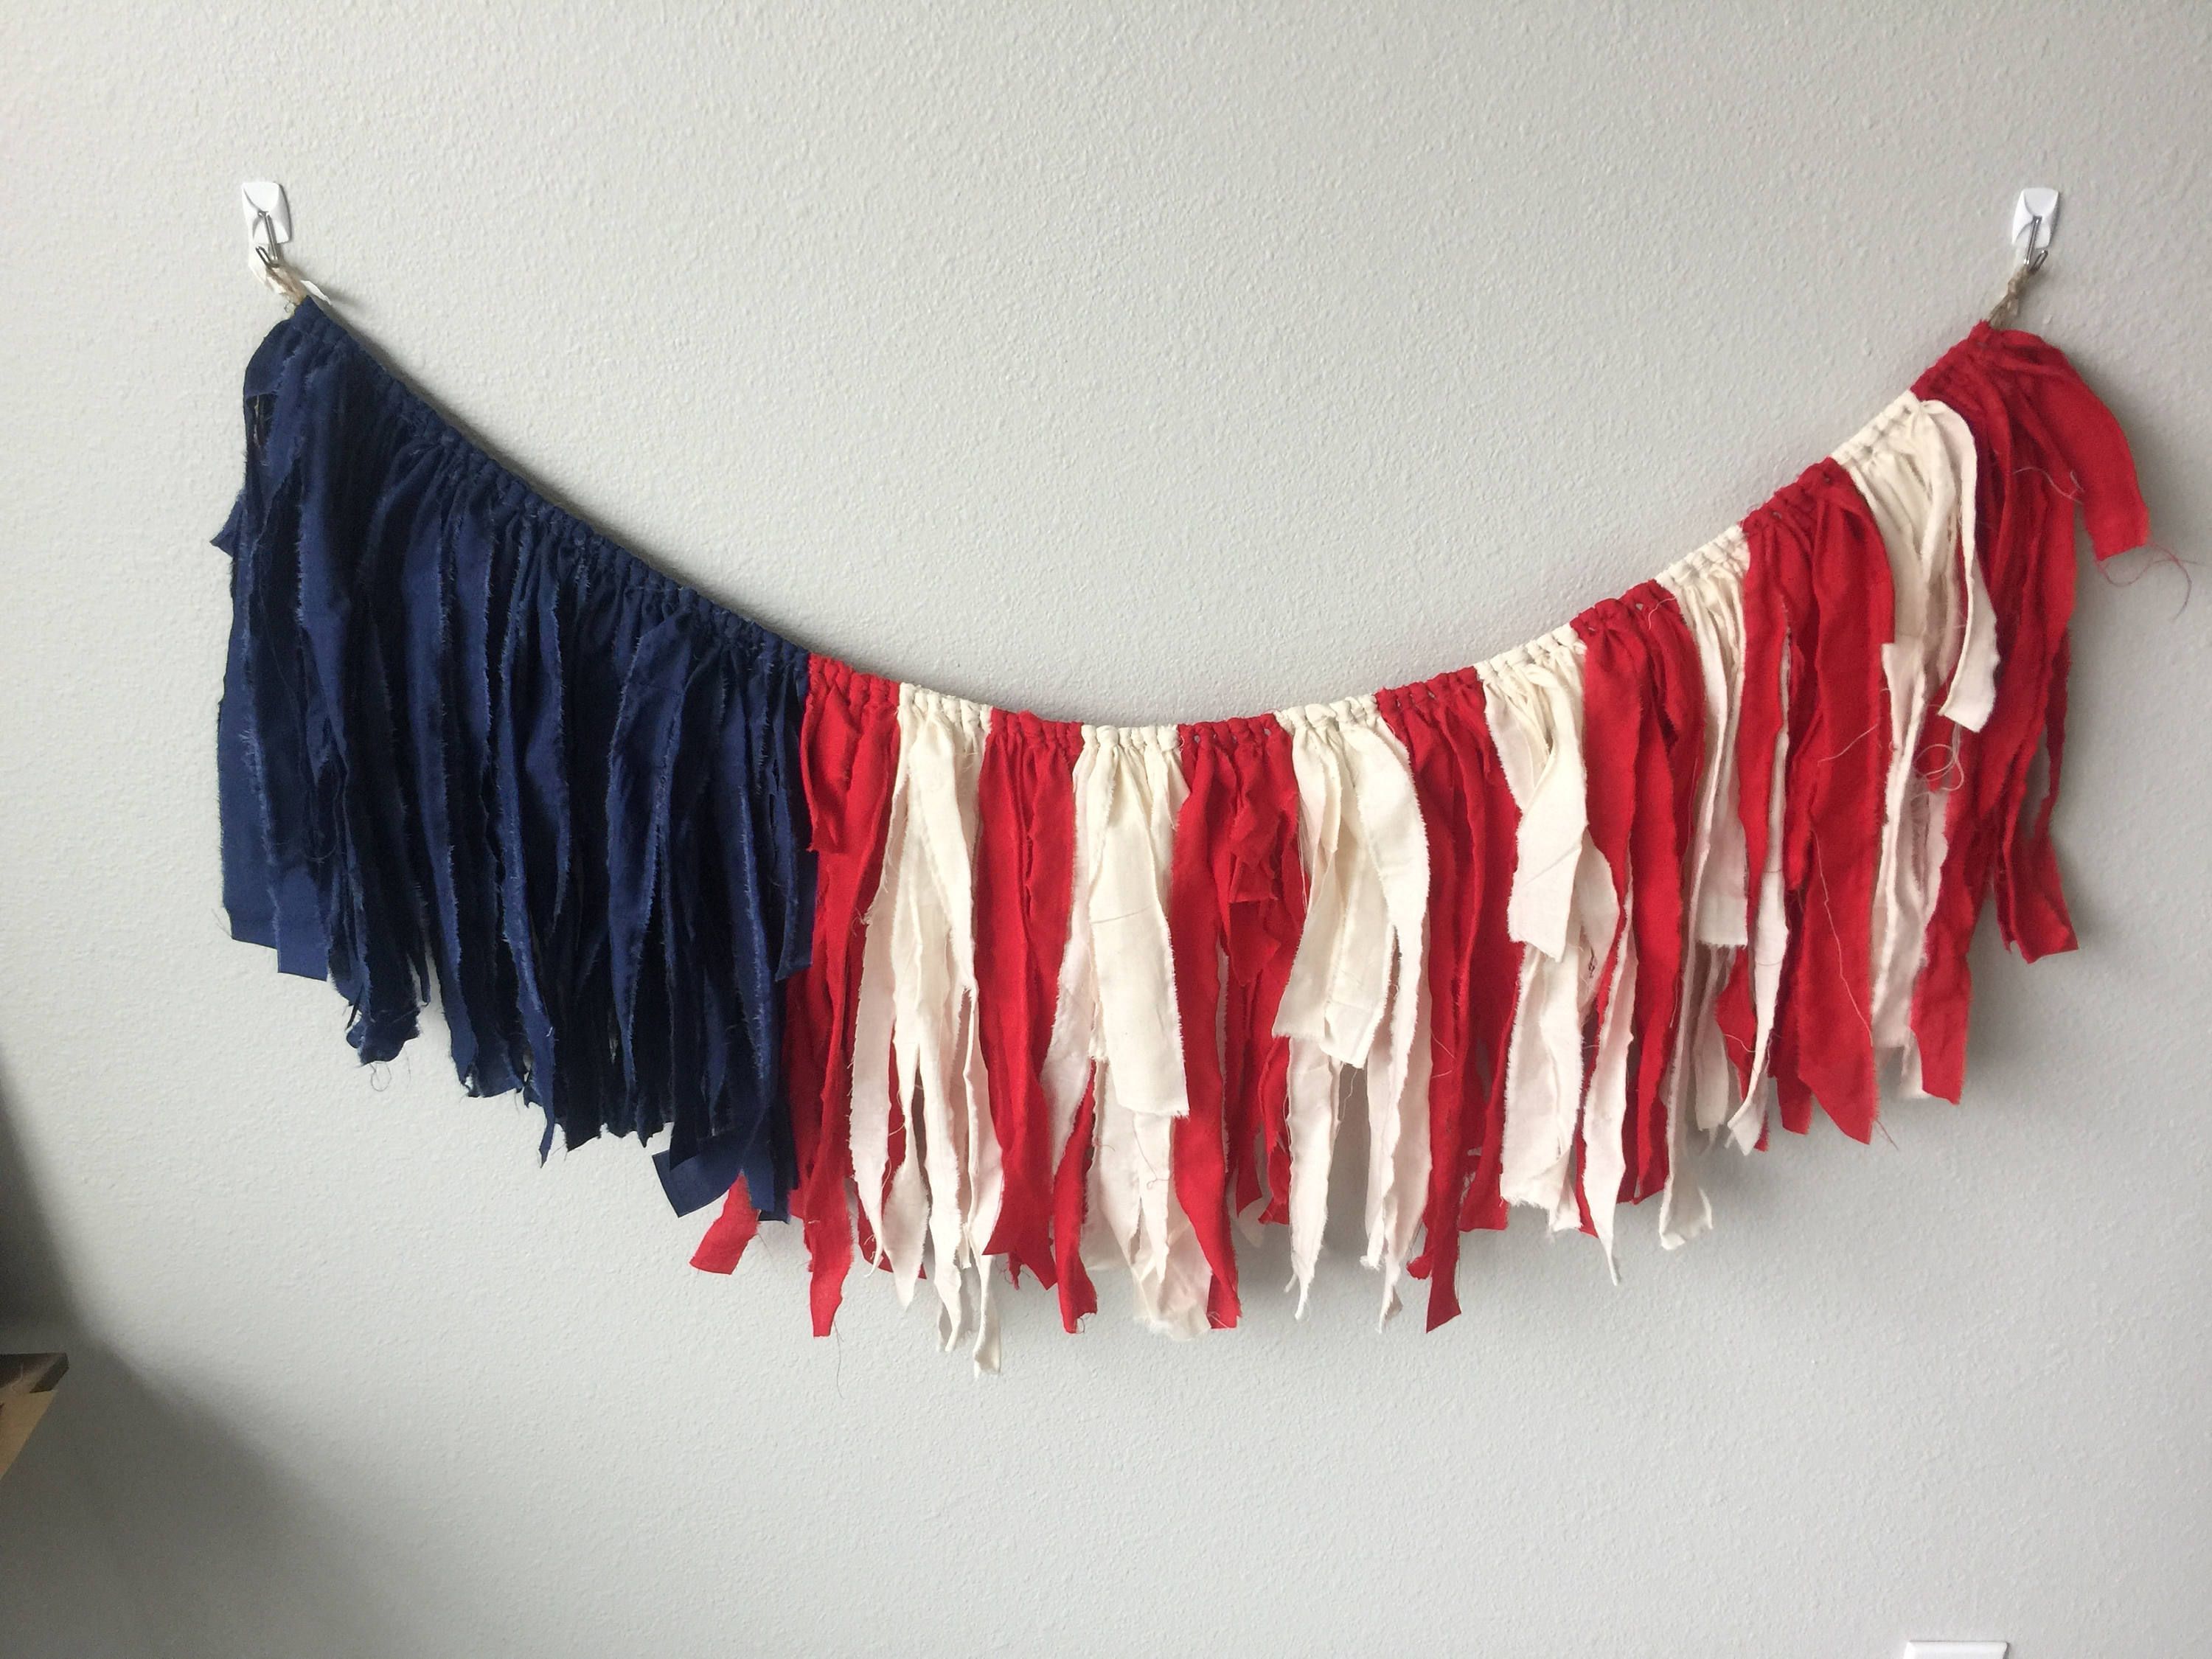 american flag garland / 4th of july garland / flag garland / flag bunting / summer garland / patriotic garland / red cream blue garland - american flag garland / 4th of july garland / flag garland / flag bunting / summer garland / patriotic garland / red cream blue garland -   18 4th of july party ideas